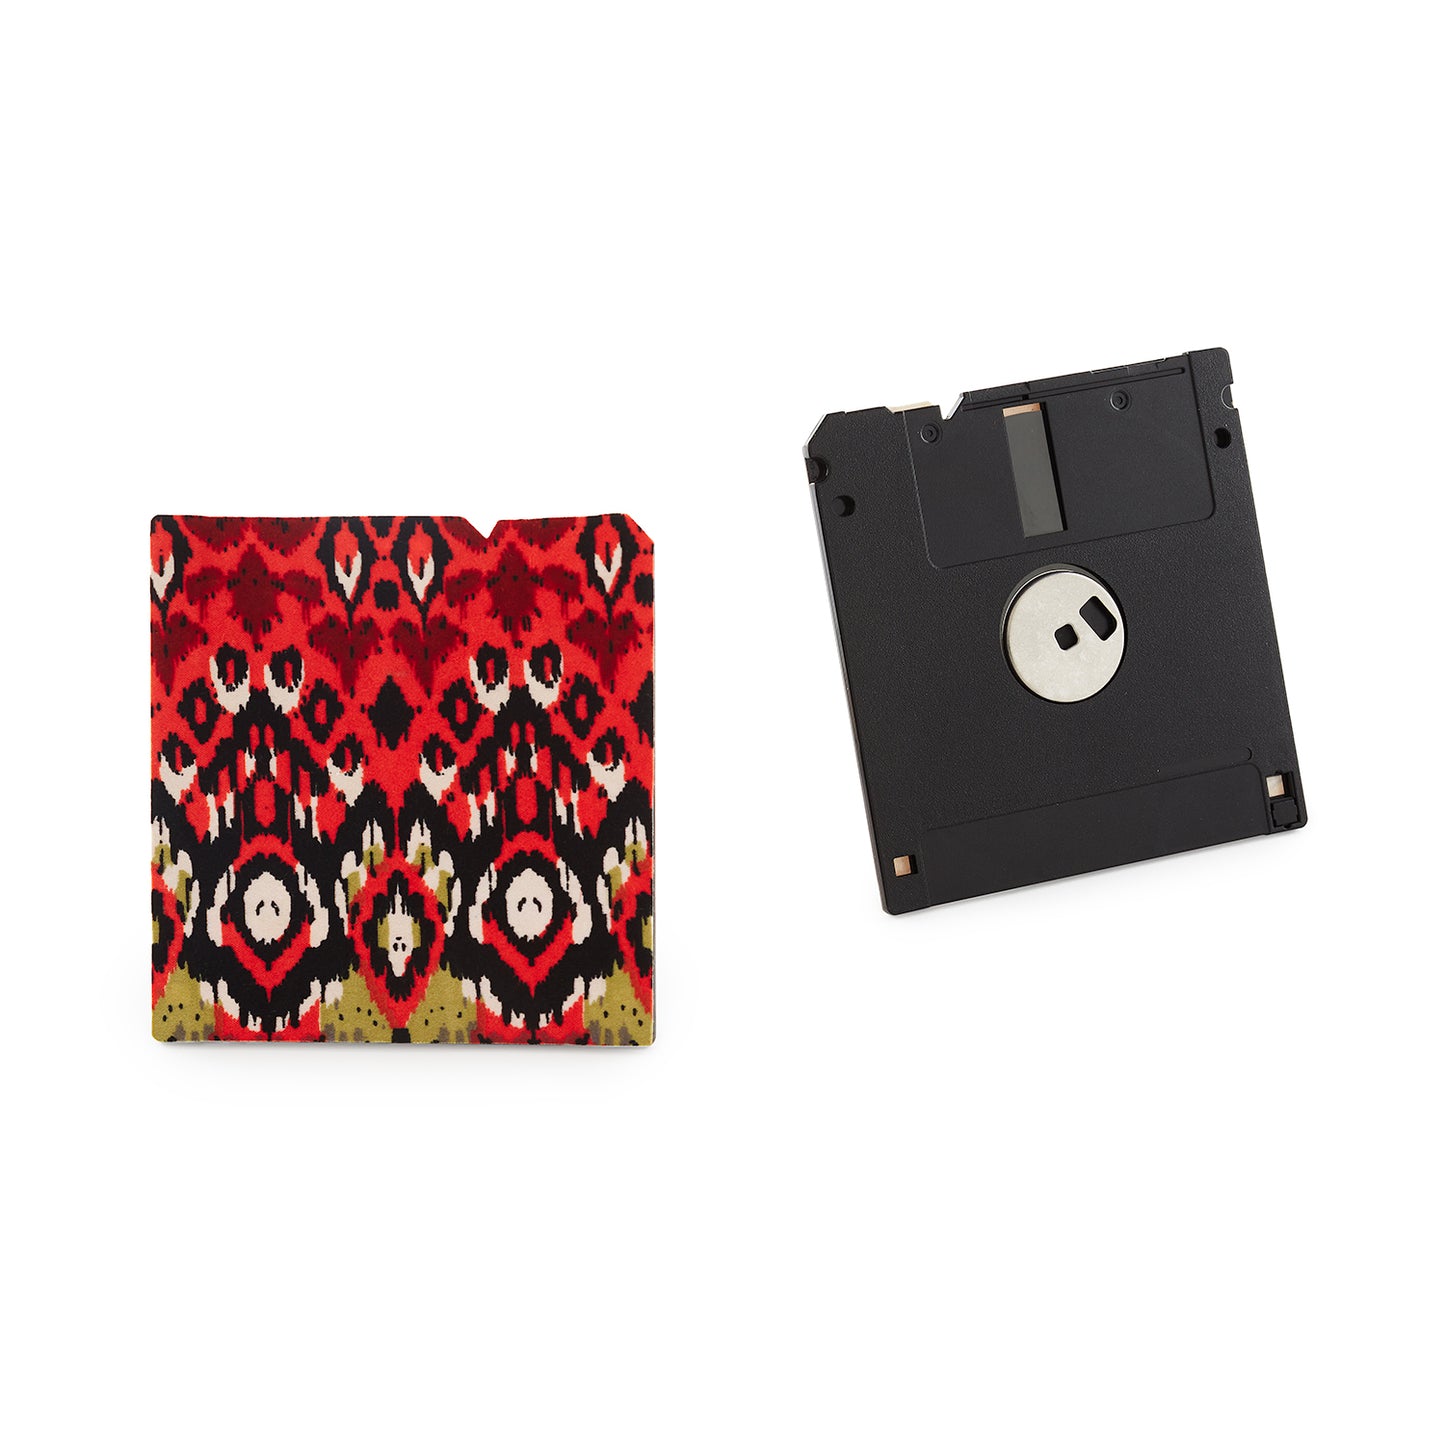 Ruby Red - Floppy Disk Coaster Set of 2